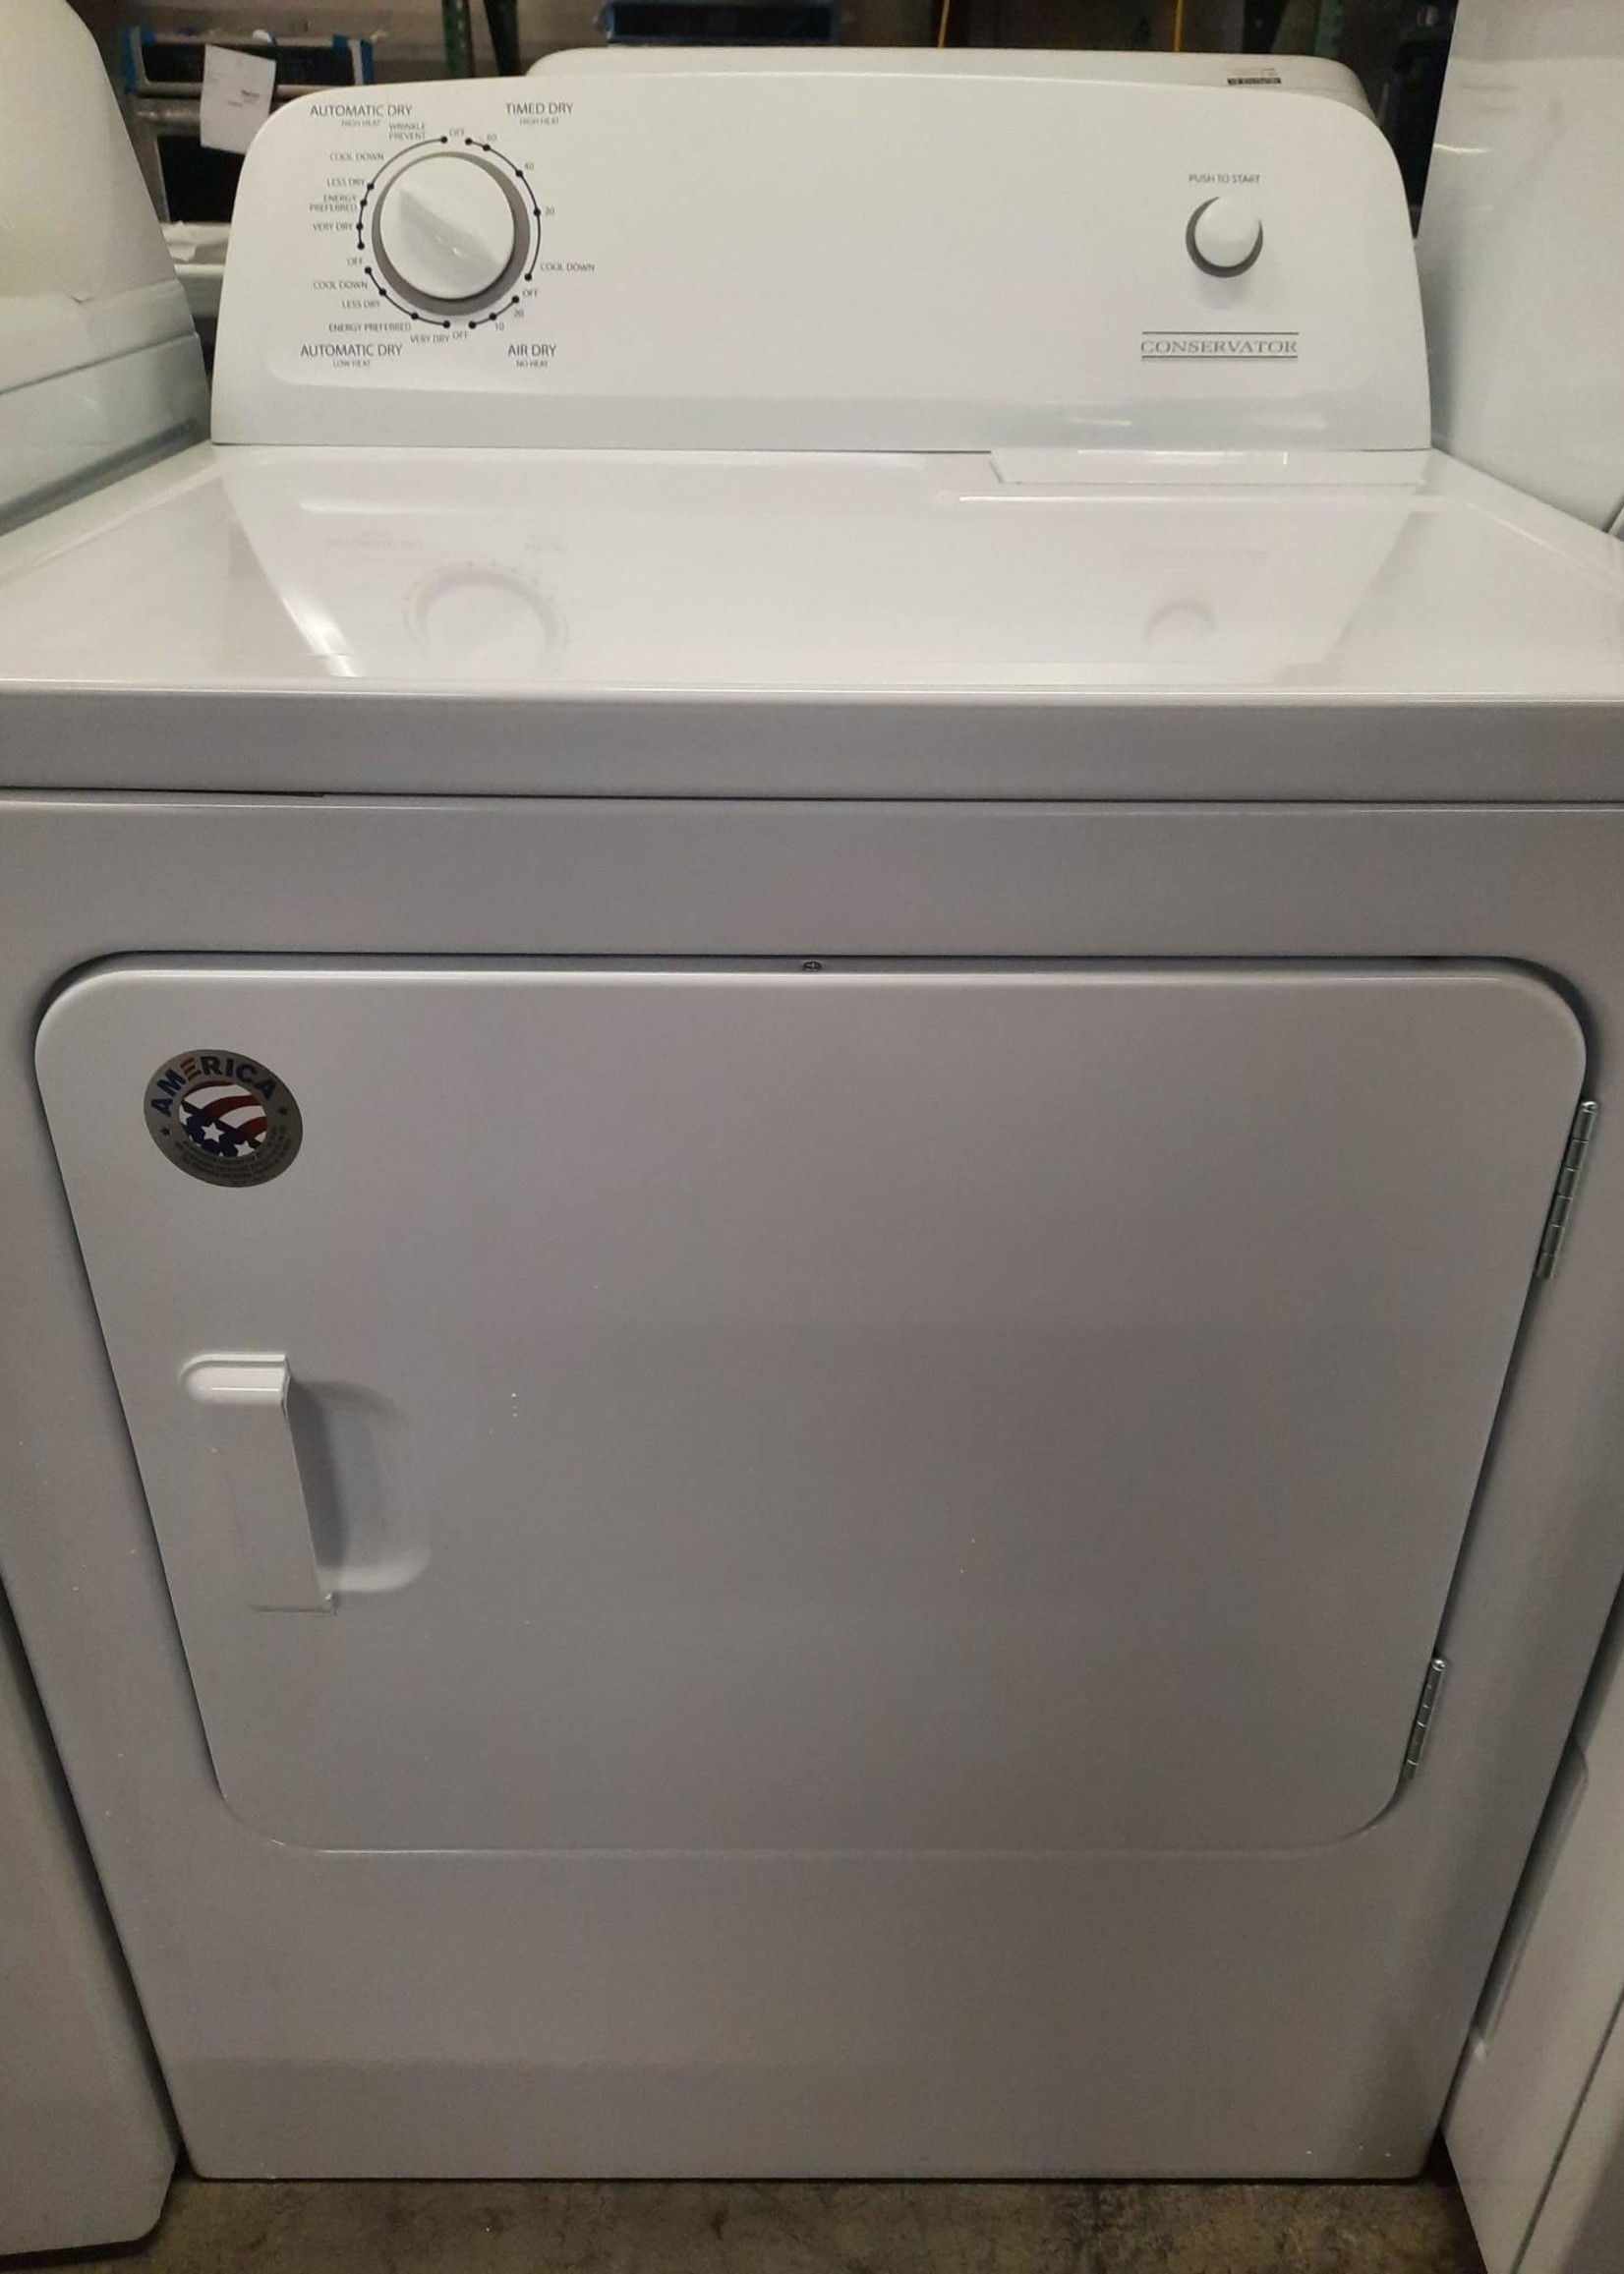 Conservator *Conservator VED6505GW0   6.5 cu ft Electric Dryer in White